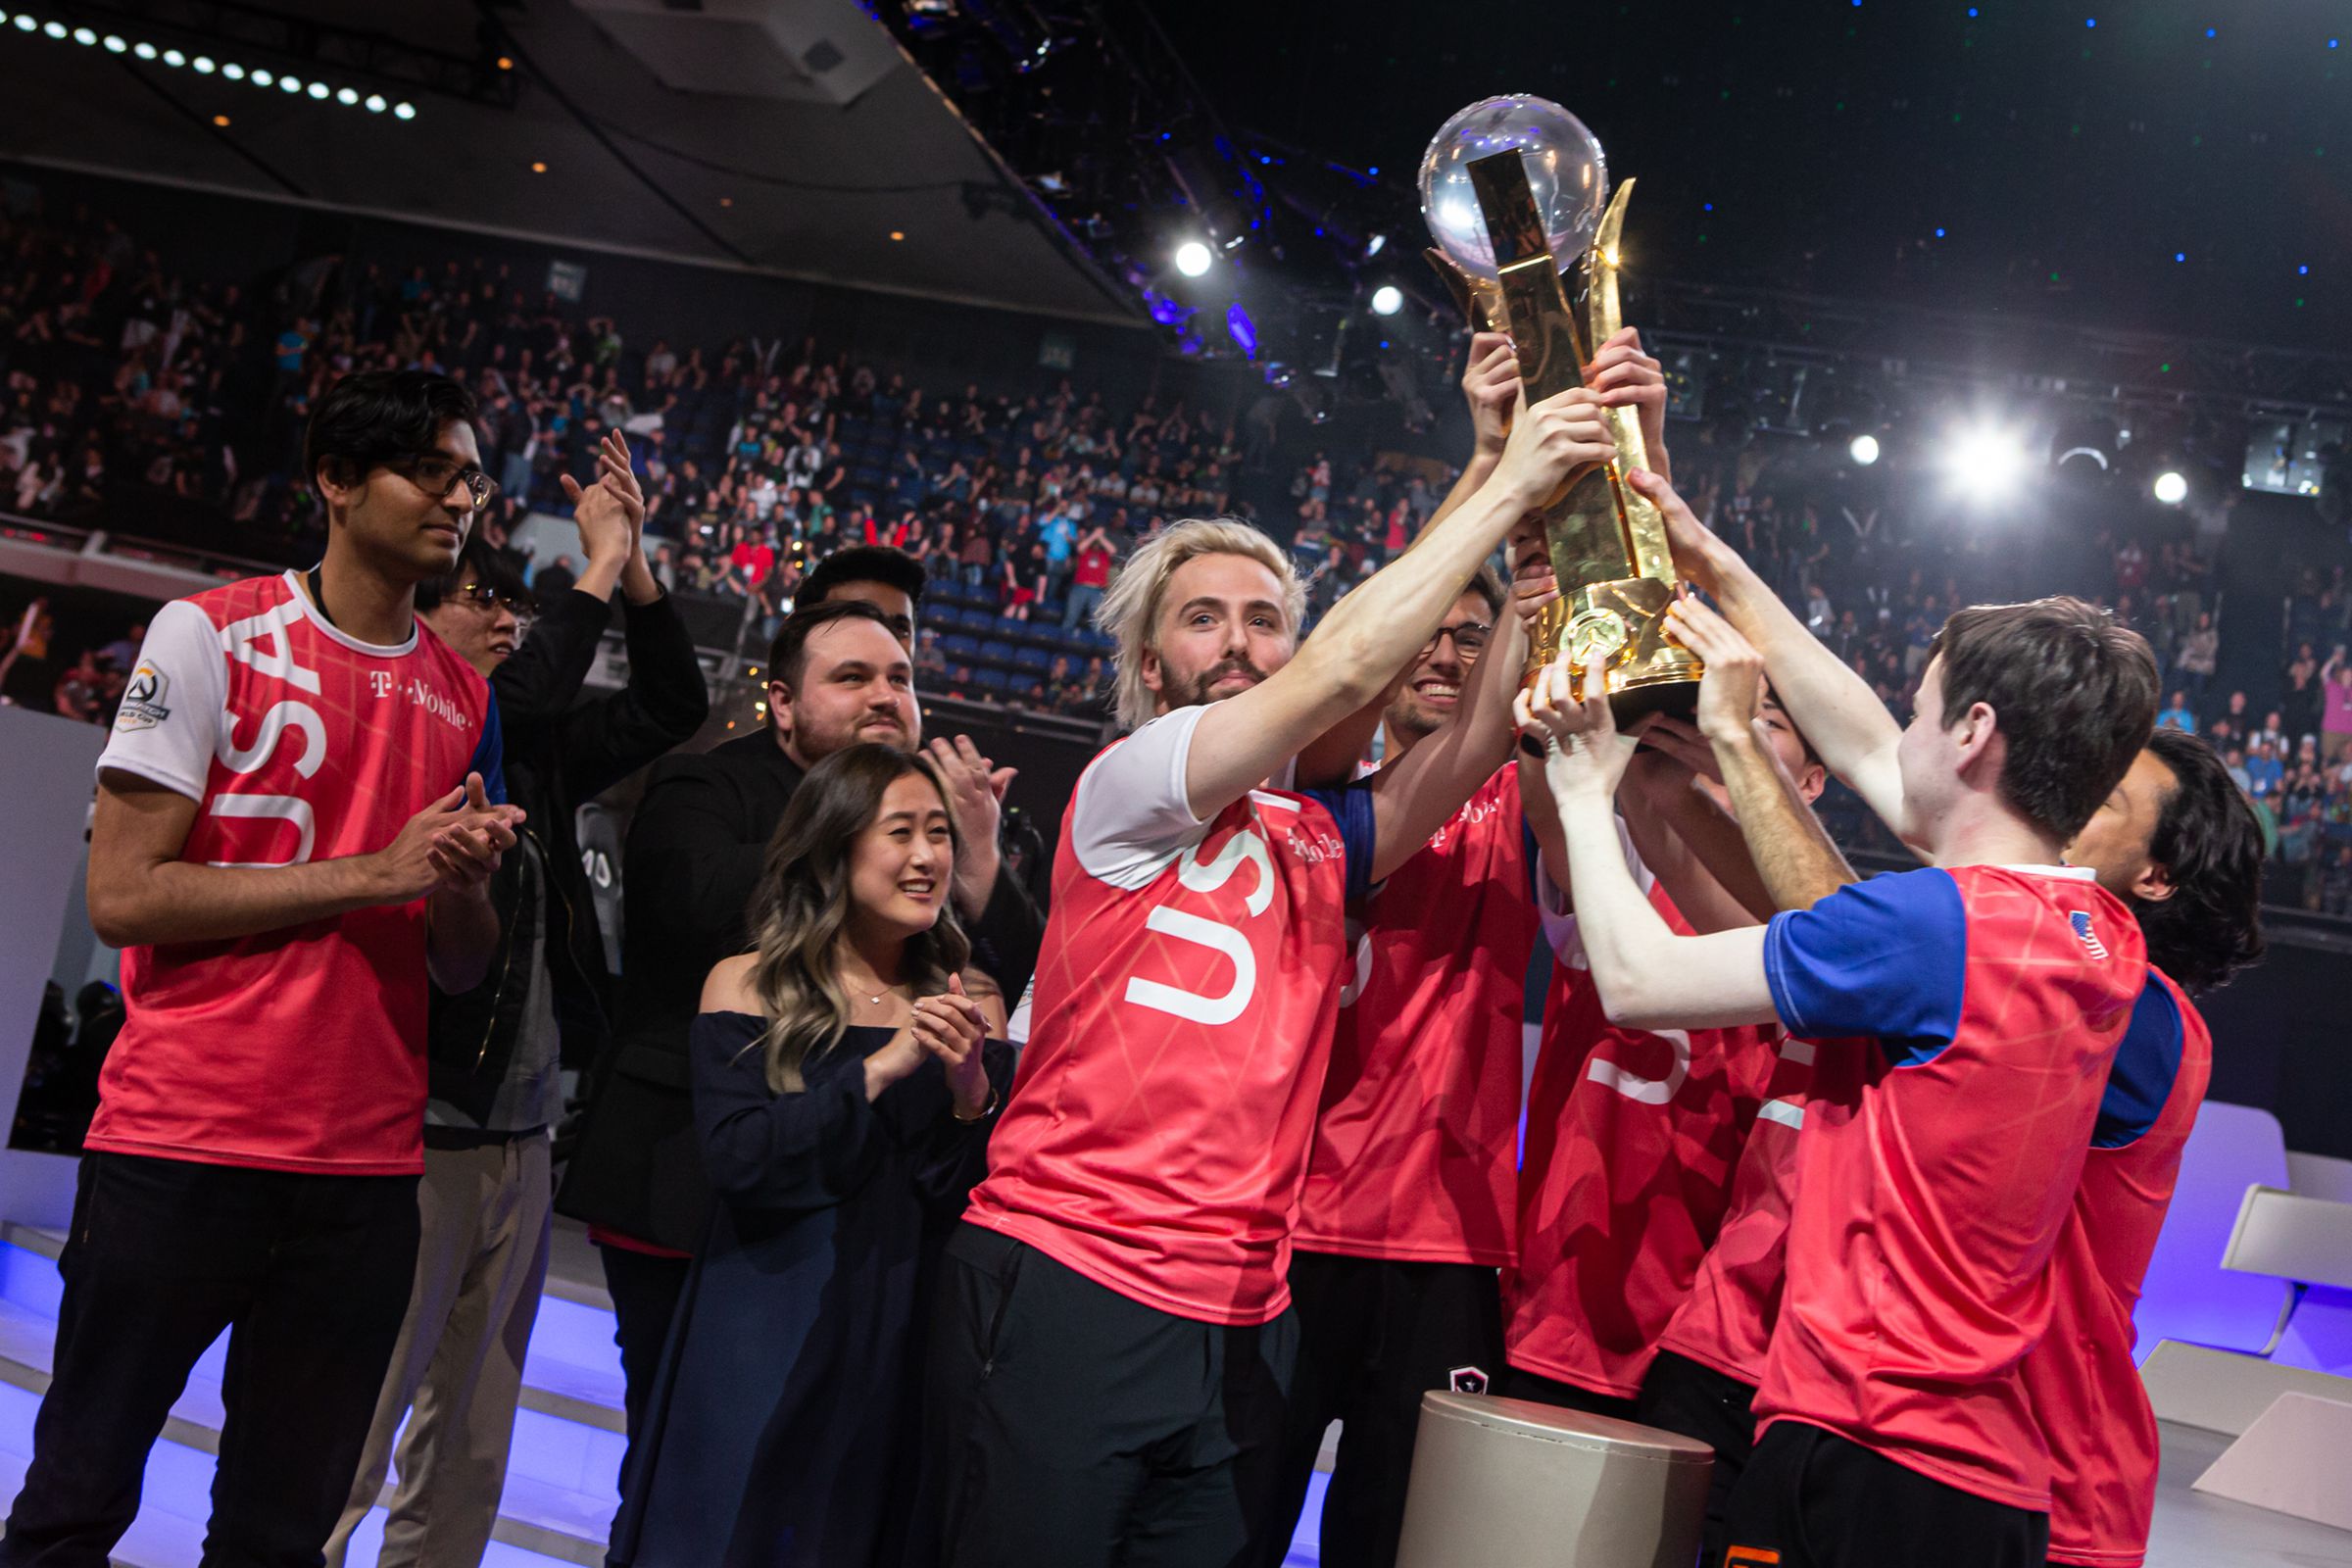 Photo from 2019 Overwatch World Cup in which the gold medalist team, the US, hold up the World Cup trophy.